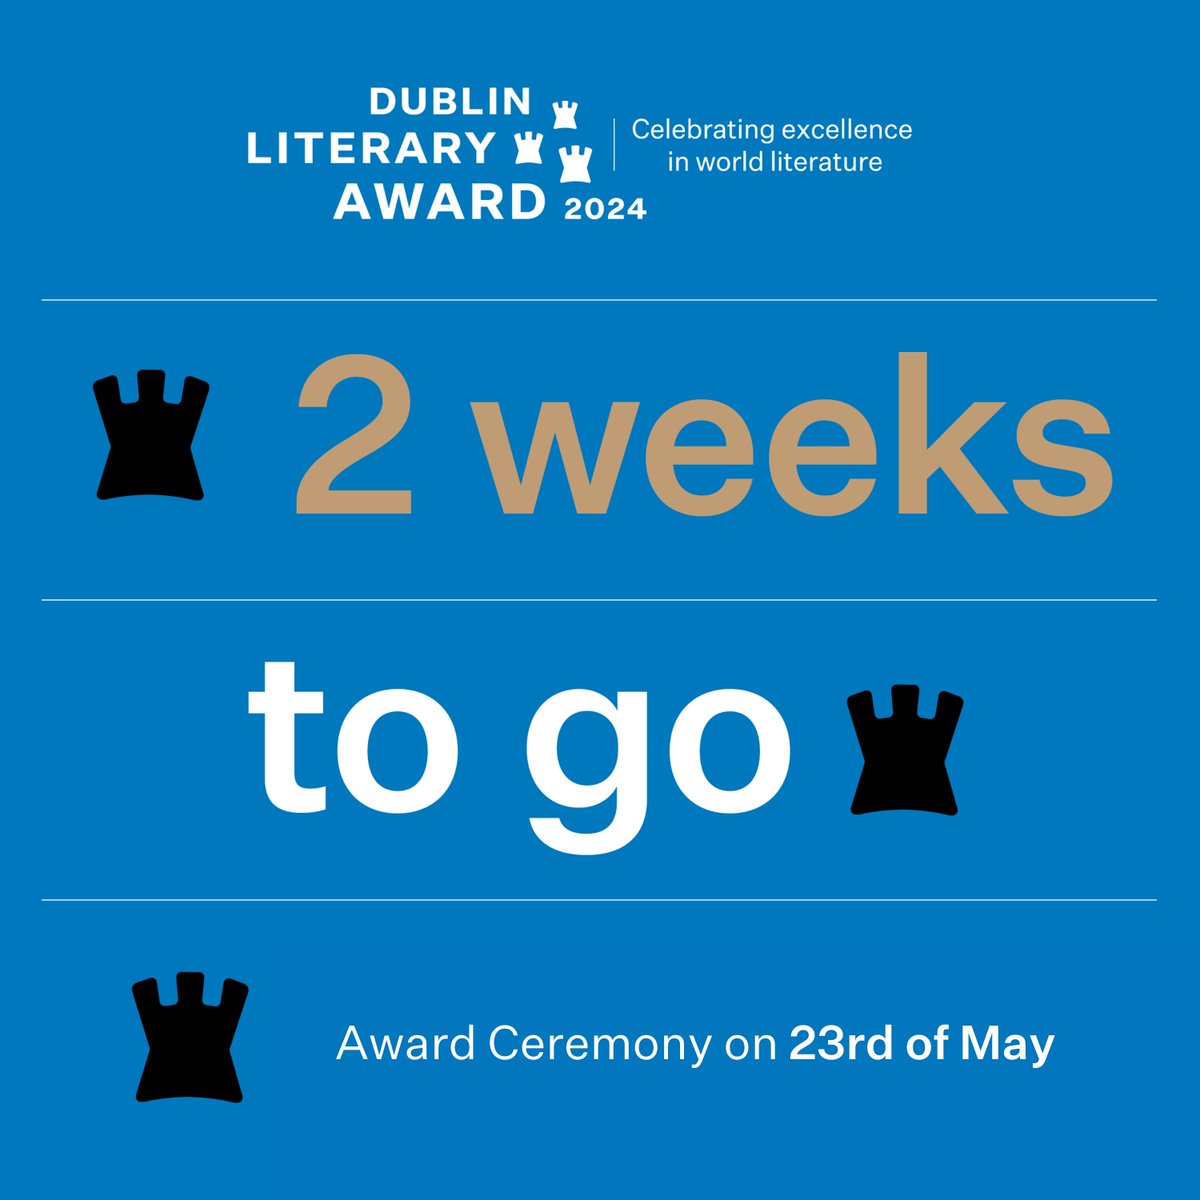 Just 2 weeks to go! ✨ The 29th winner of the Dublin Literary Award will be announced on Thursday, 23rd of May as part of International Literature Festival Dublin. Join us worldwide LIVE from 12pm on our YouTube Channel or our Facebook page: crowdcast.io/c/ub4qi5l6aydk